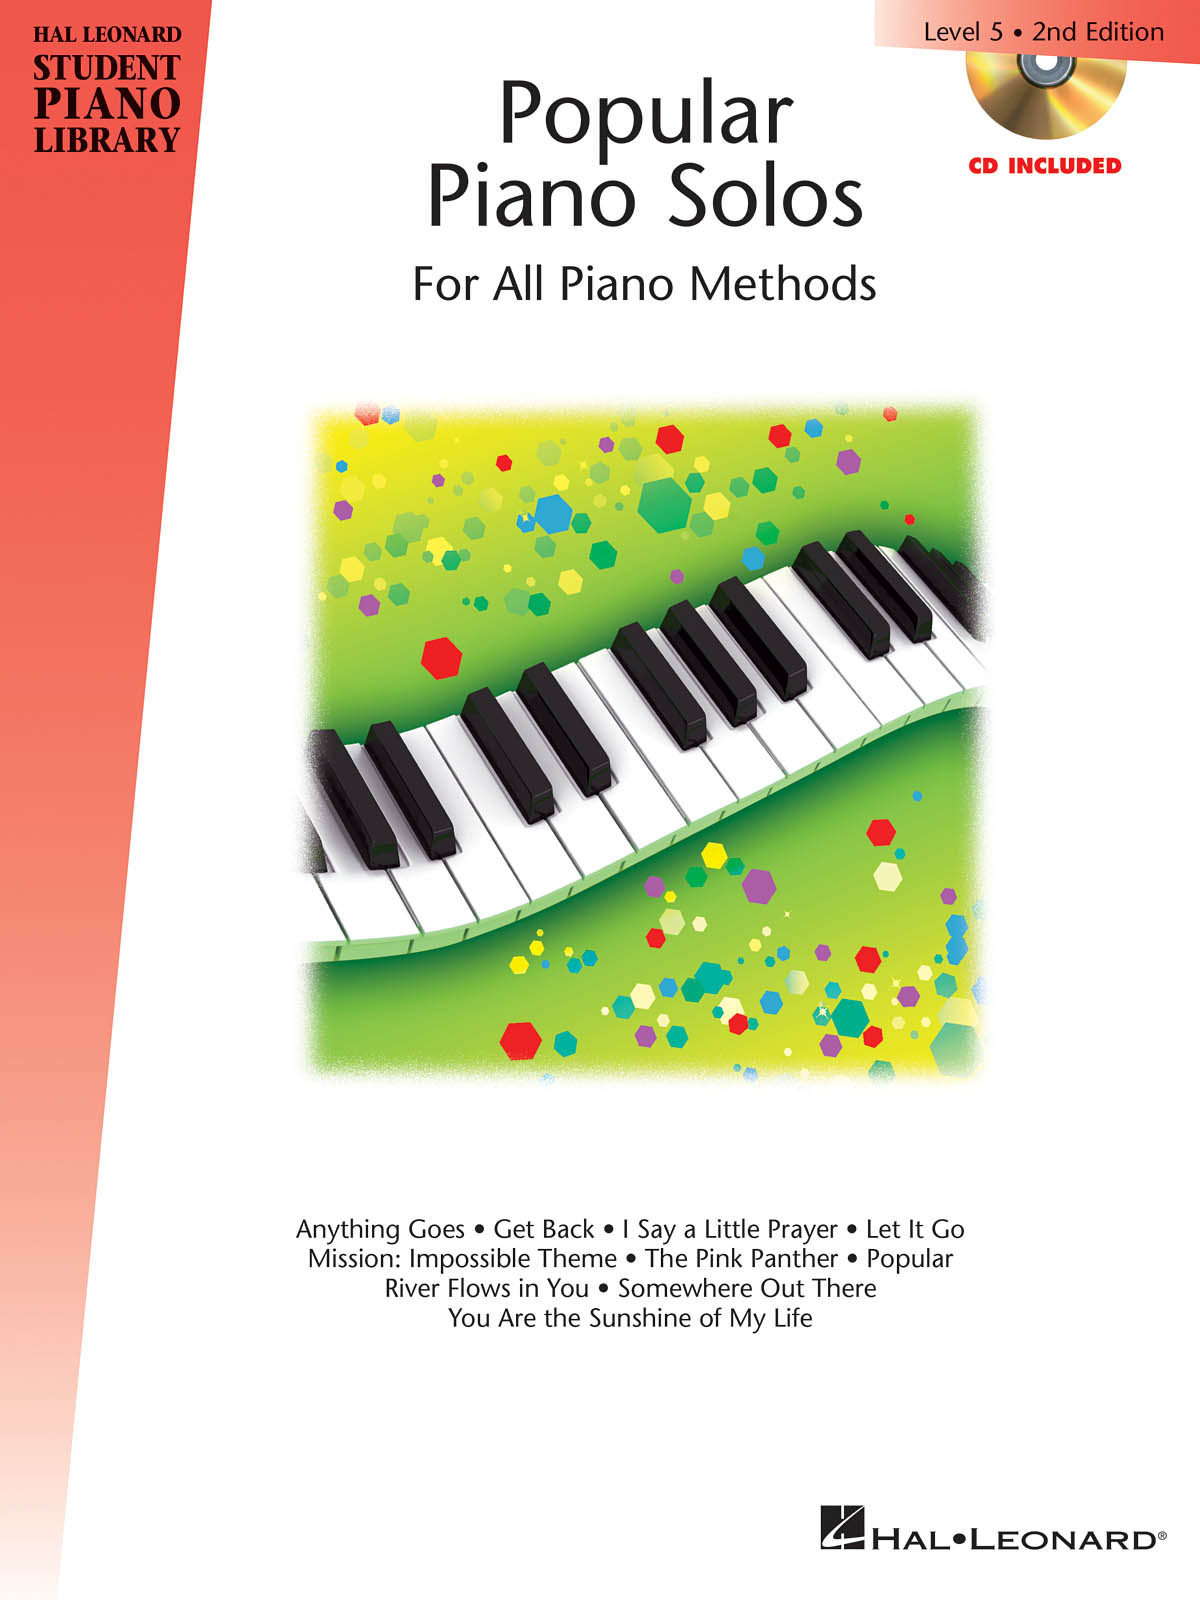 Popular Piano Solos 2nd Edition -Level 5 - Hal Leonard Student Piano Library - noty pro děti